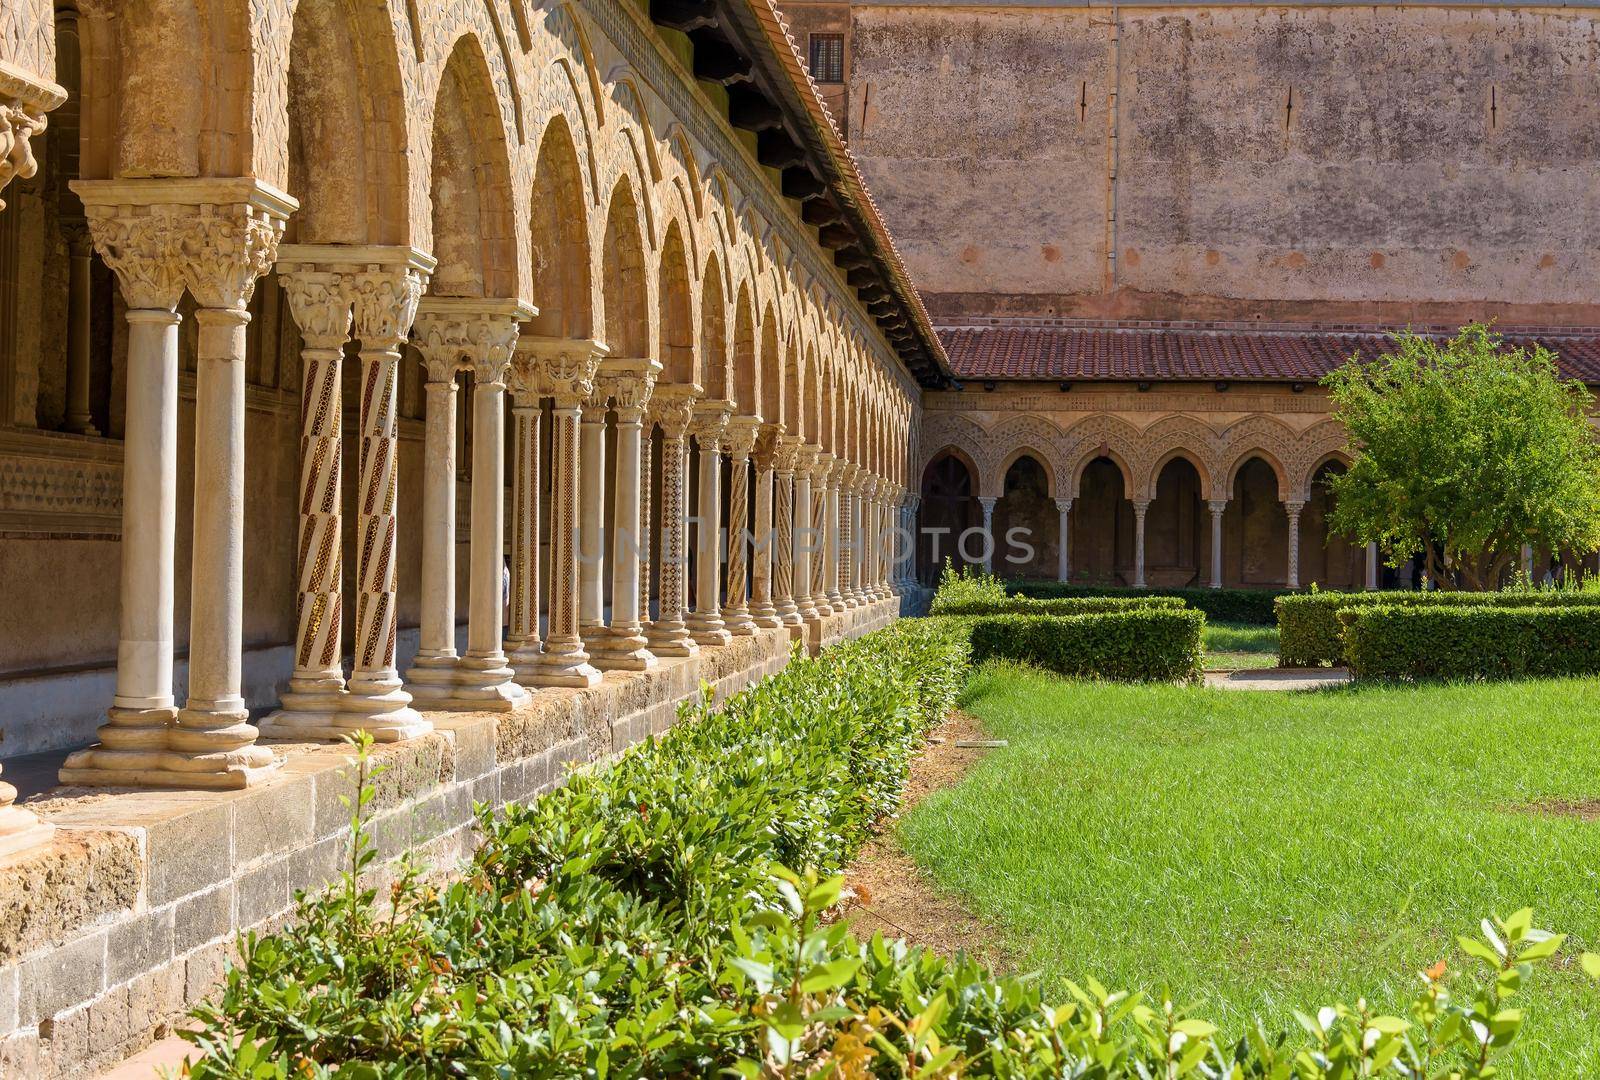 Cloister at the Monreale Abbey by mkos83